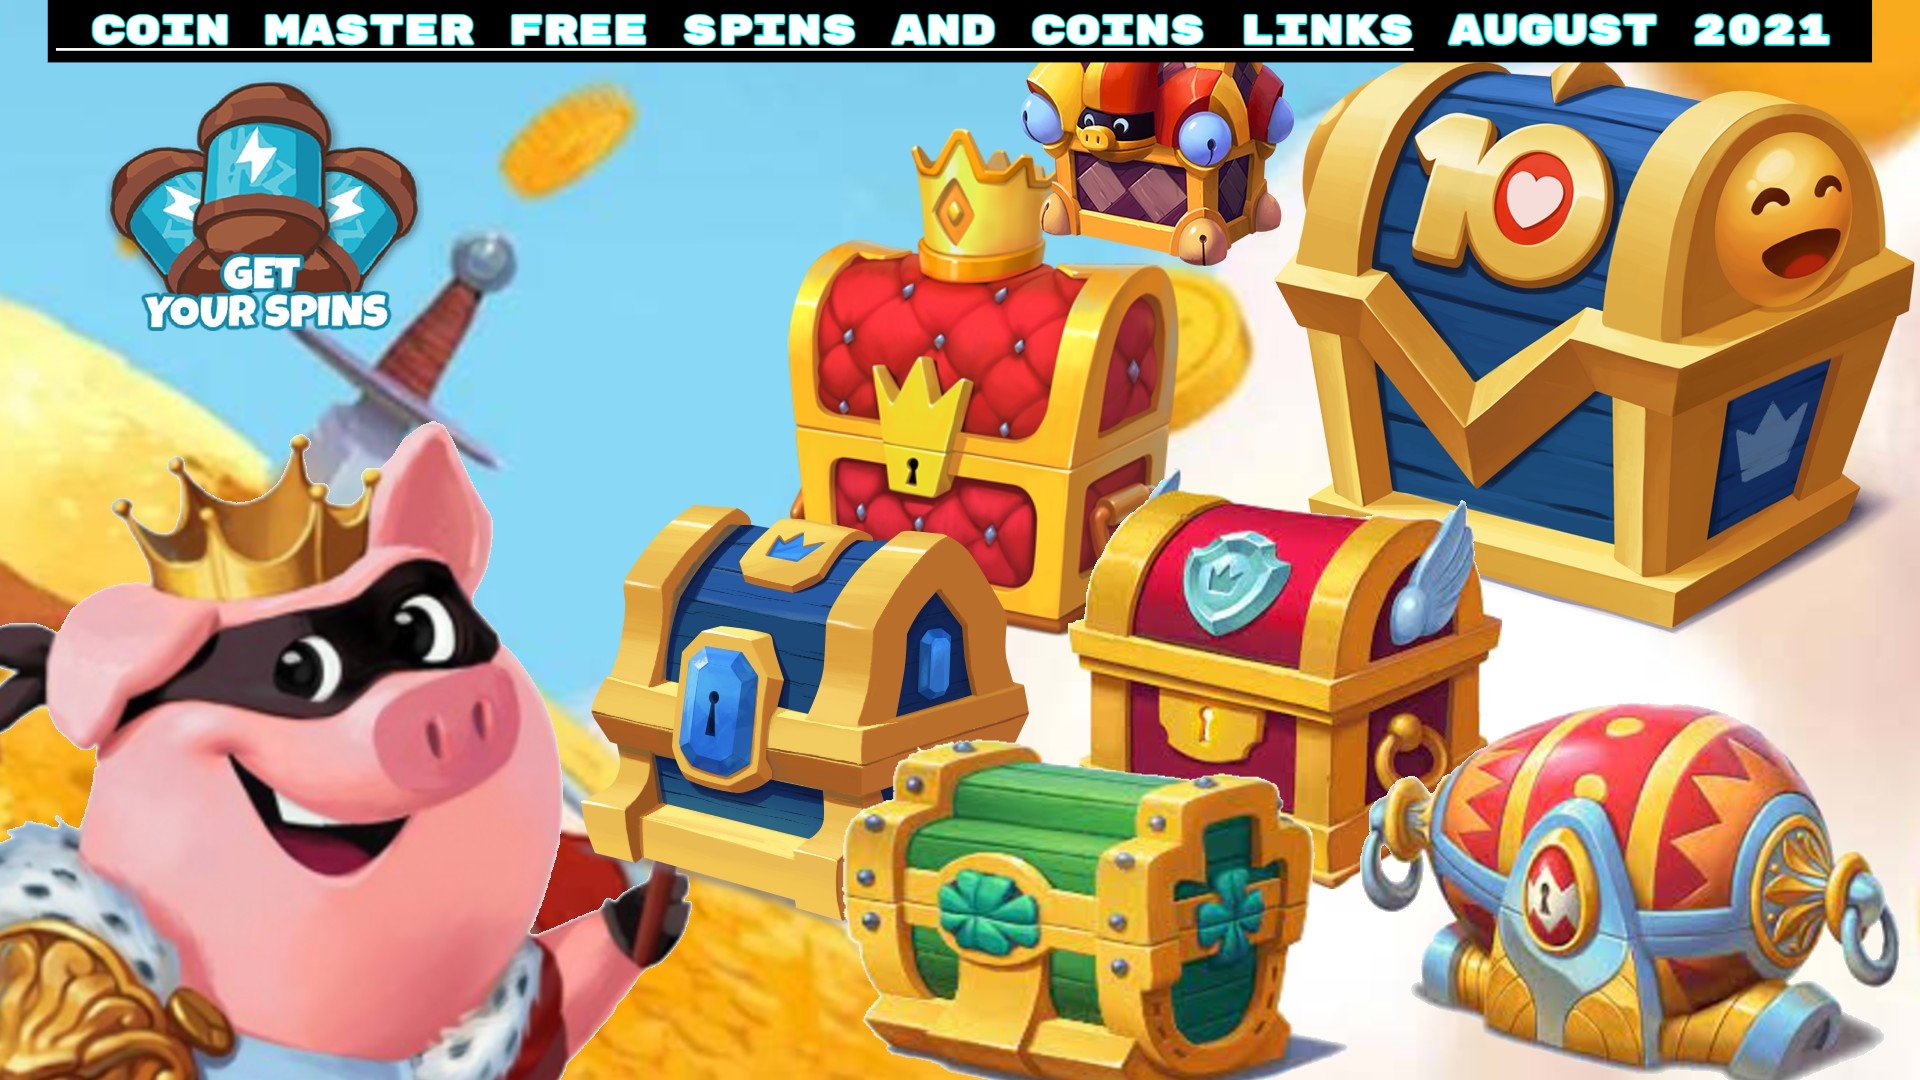 You are currently viewing Coin Master free spins and coins links 15 August 2021